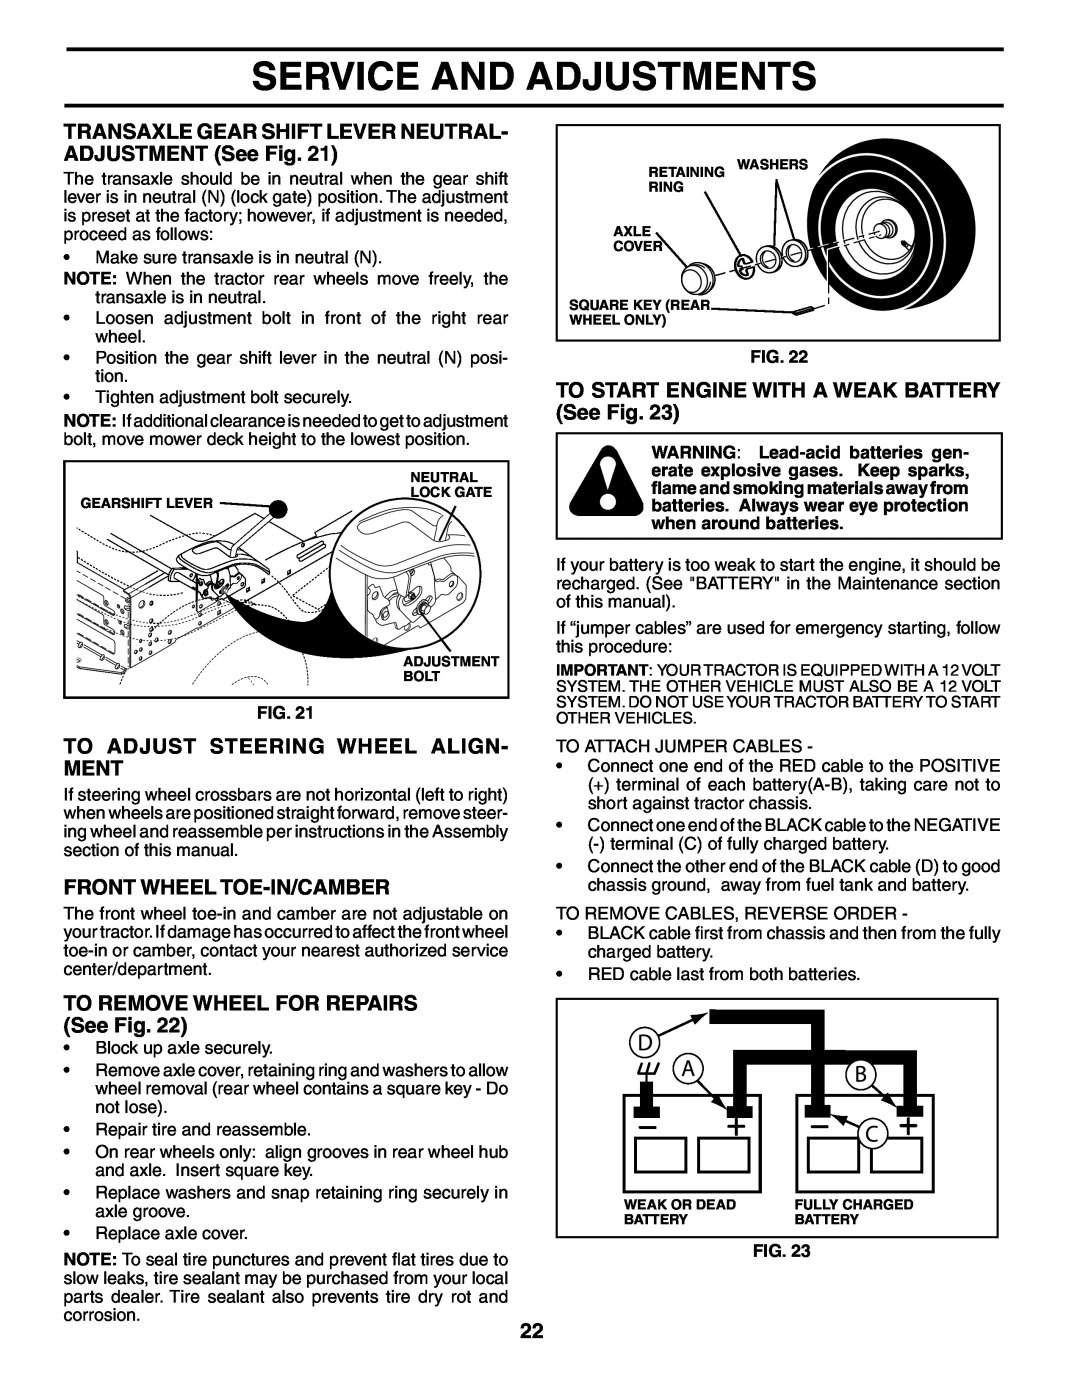 Poulan HD13538 manual To Adjust Steering Wheel Align- Ment, Front Wheel Toe-In/Camber, TO REMOVE WHEEL FOR REPAIRS See Fig 